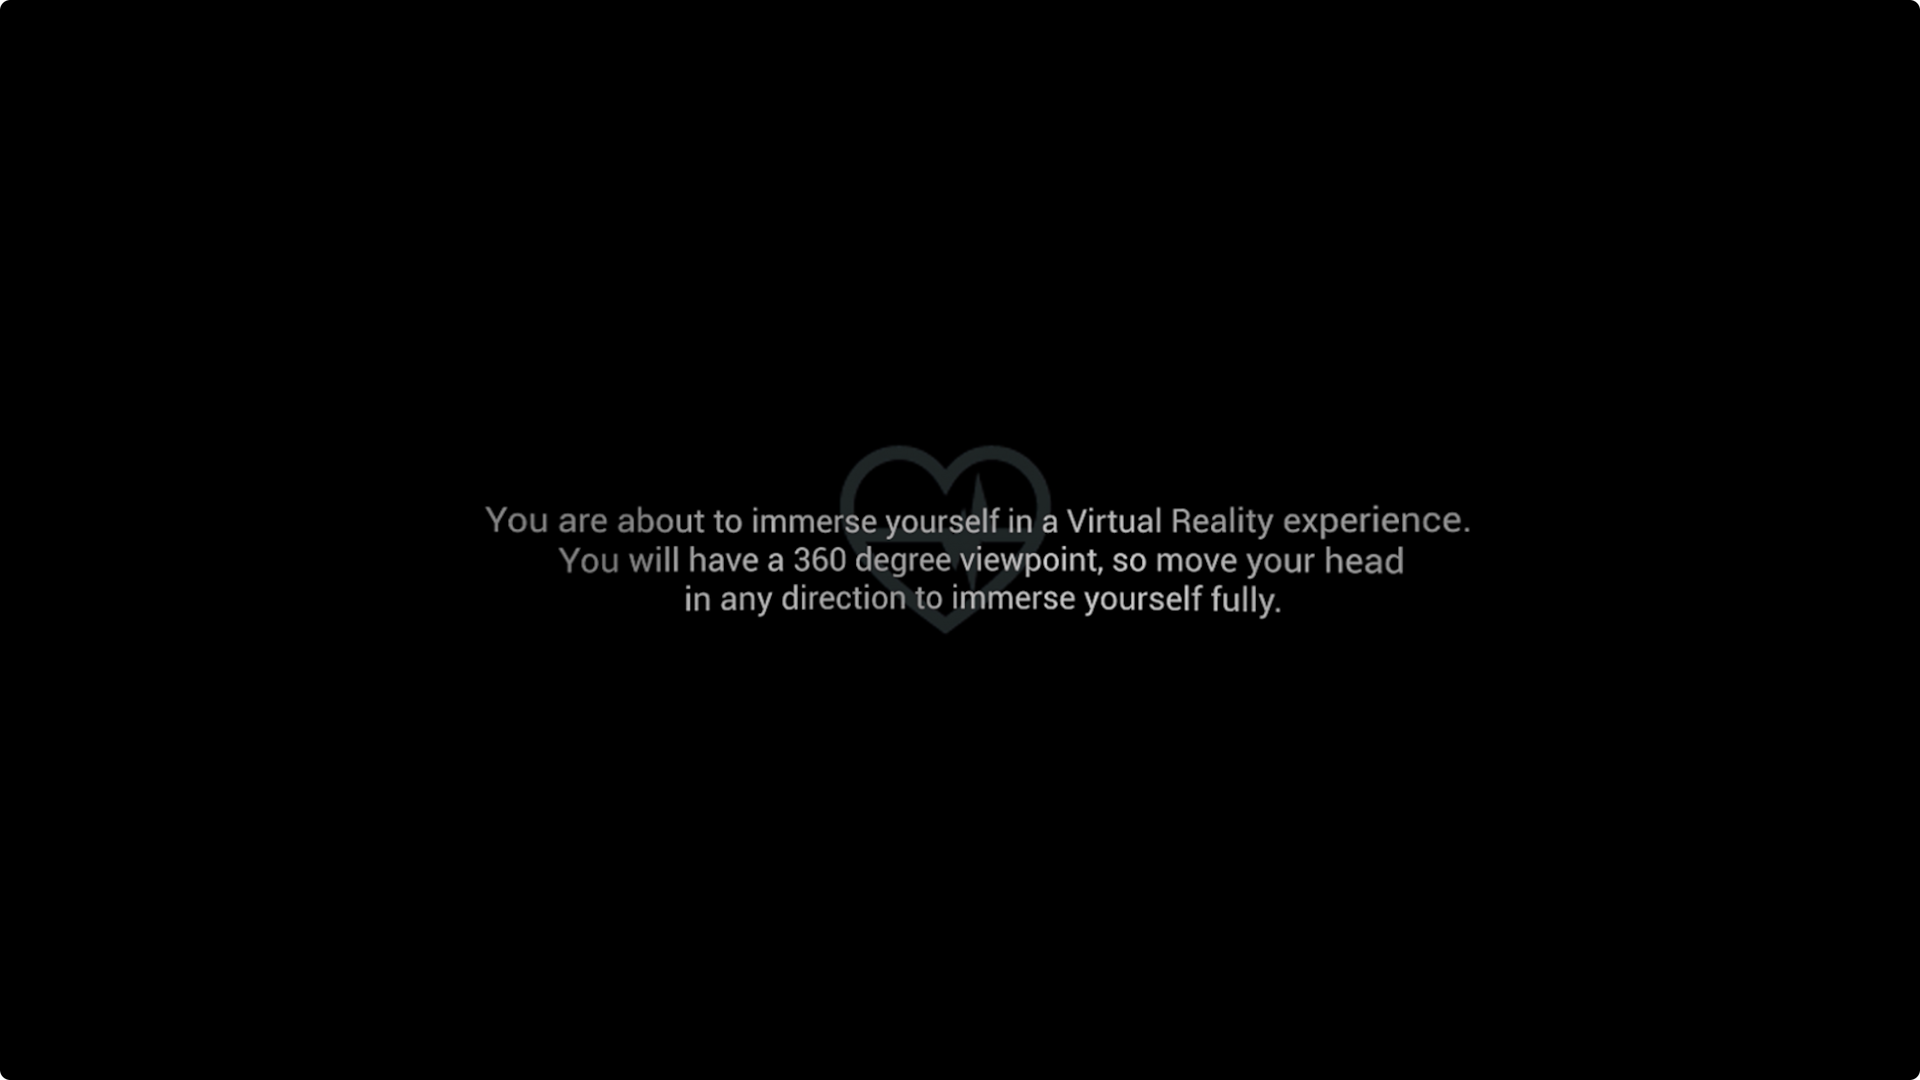 A black screen with the outline of a small, grey heart symbol in the middle, with text overlaying it that explains the user is about to enter a VR experience.